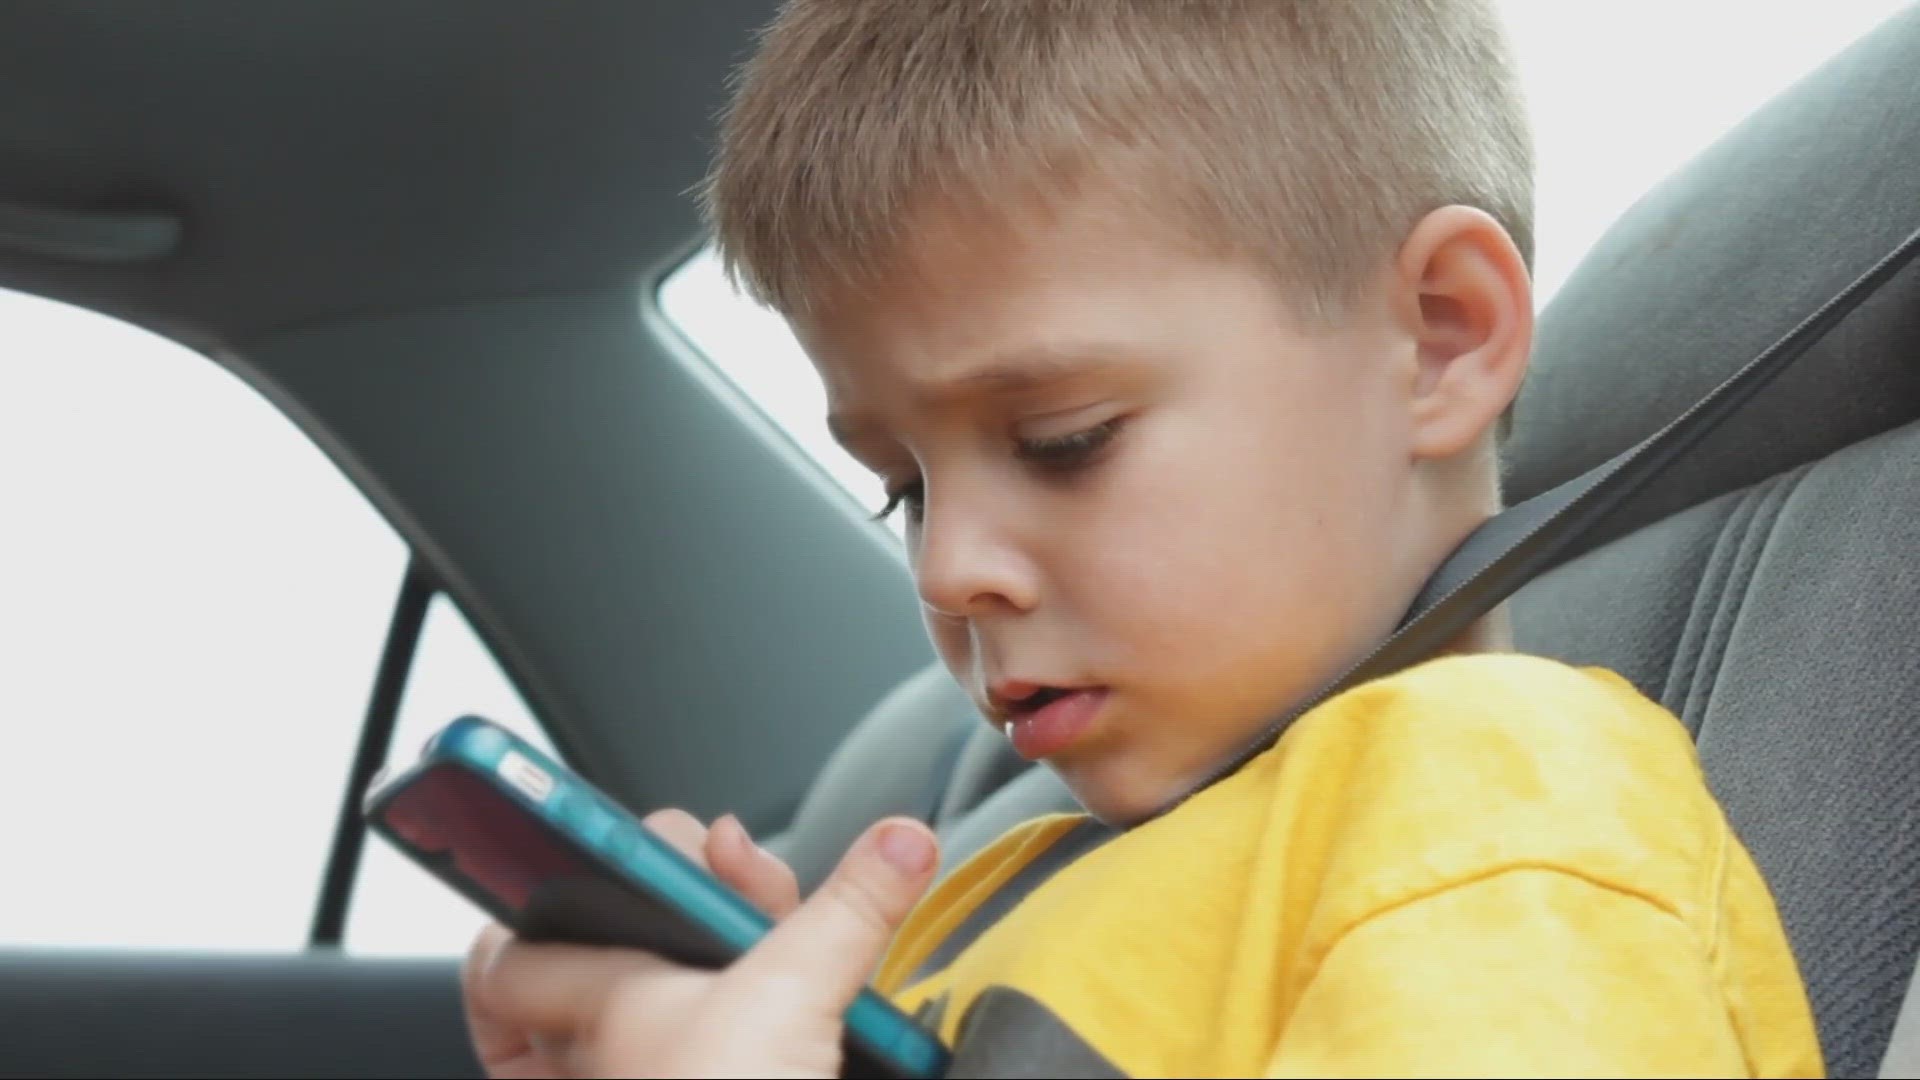 An expert speaks with 3News' Maureen Kyle about kids using social media.